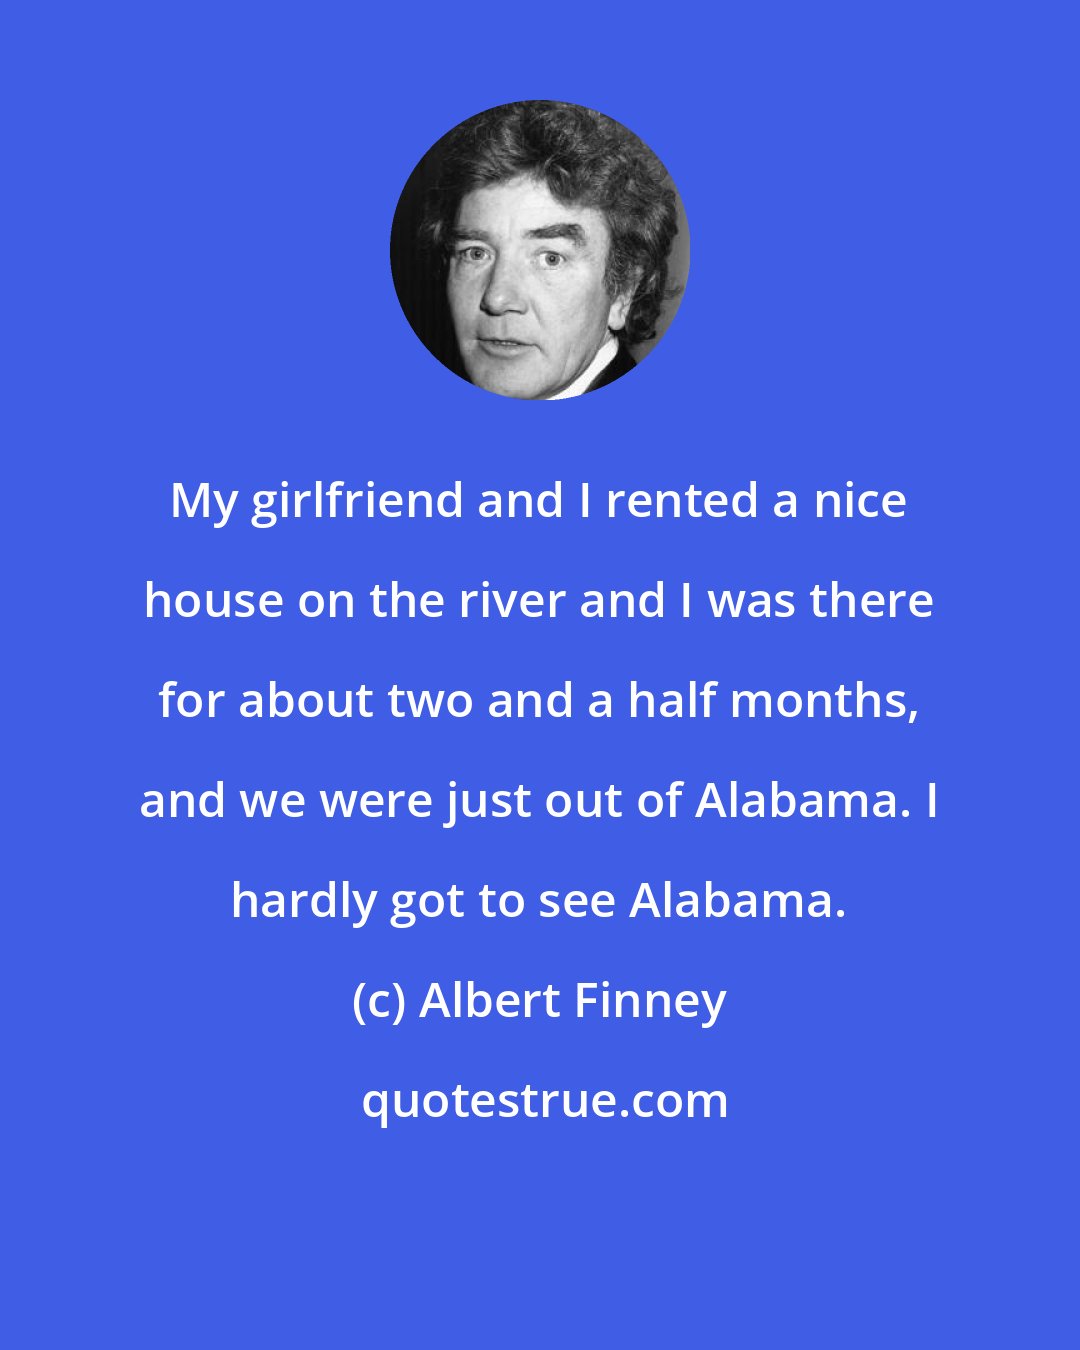 Albert Finney: My girlfriend and I rented a nice house on the river and I was there for about two and a half months, and we were just out of Alabama. I hardly got to see Alabama.